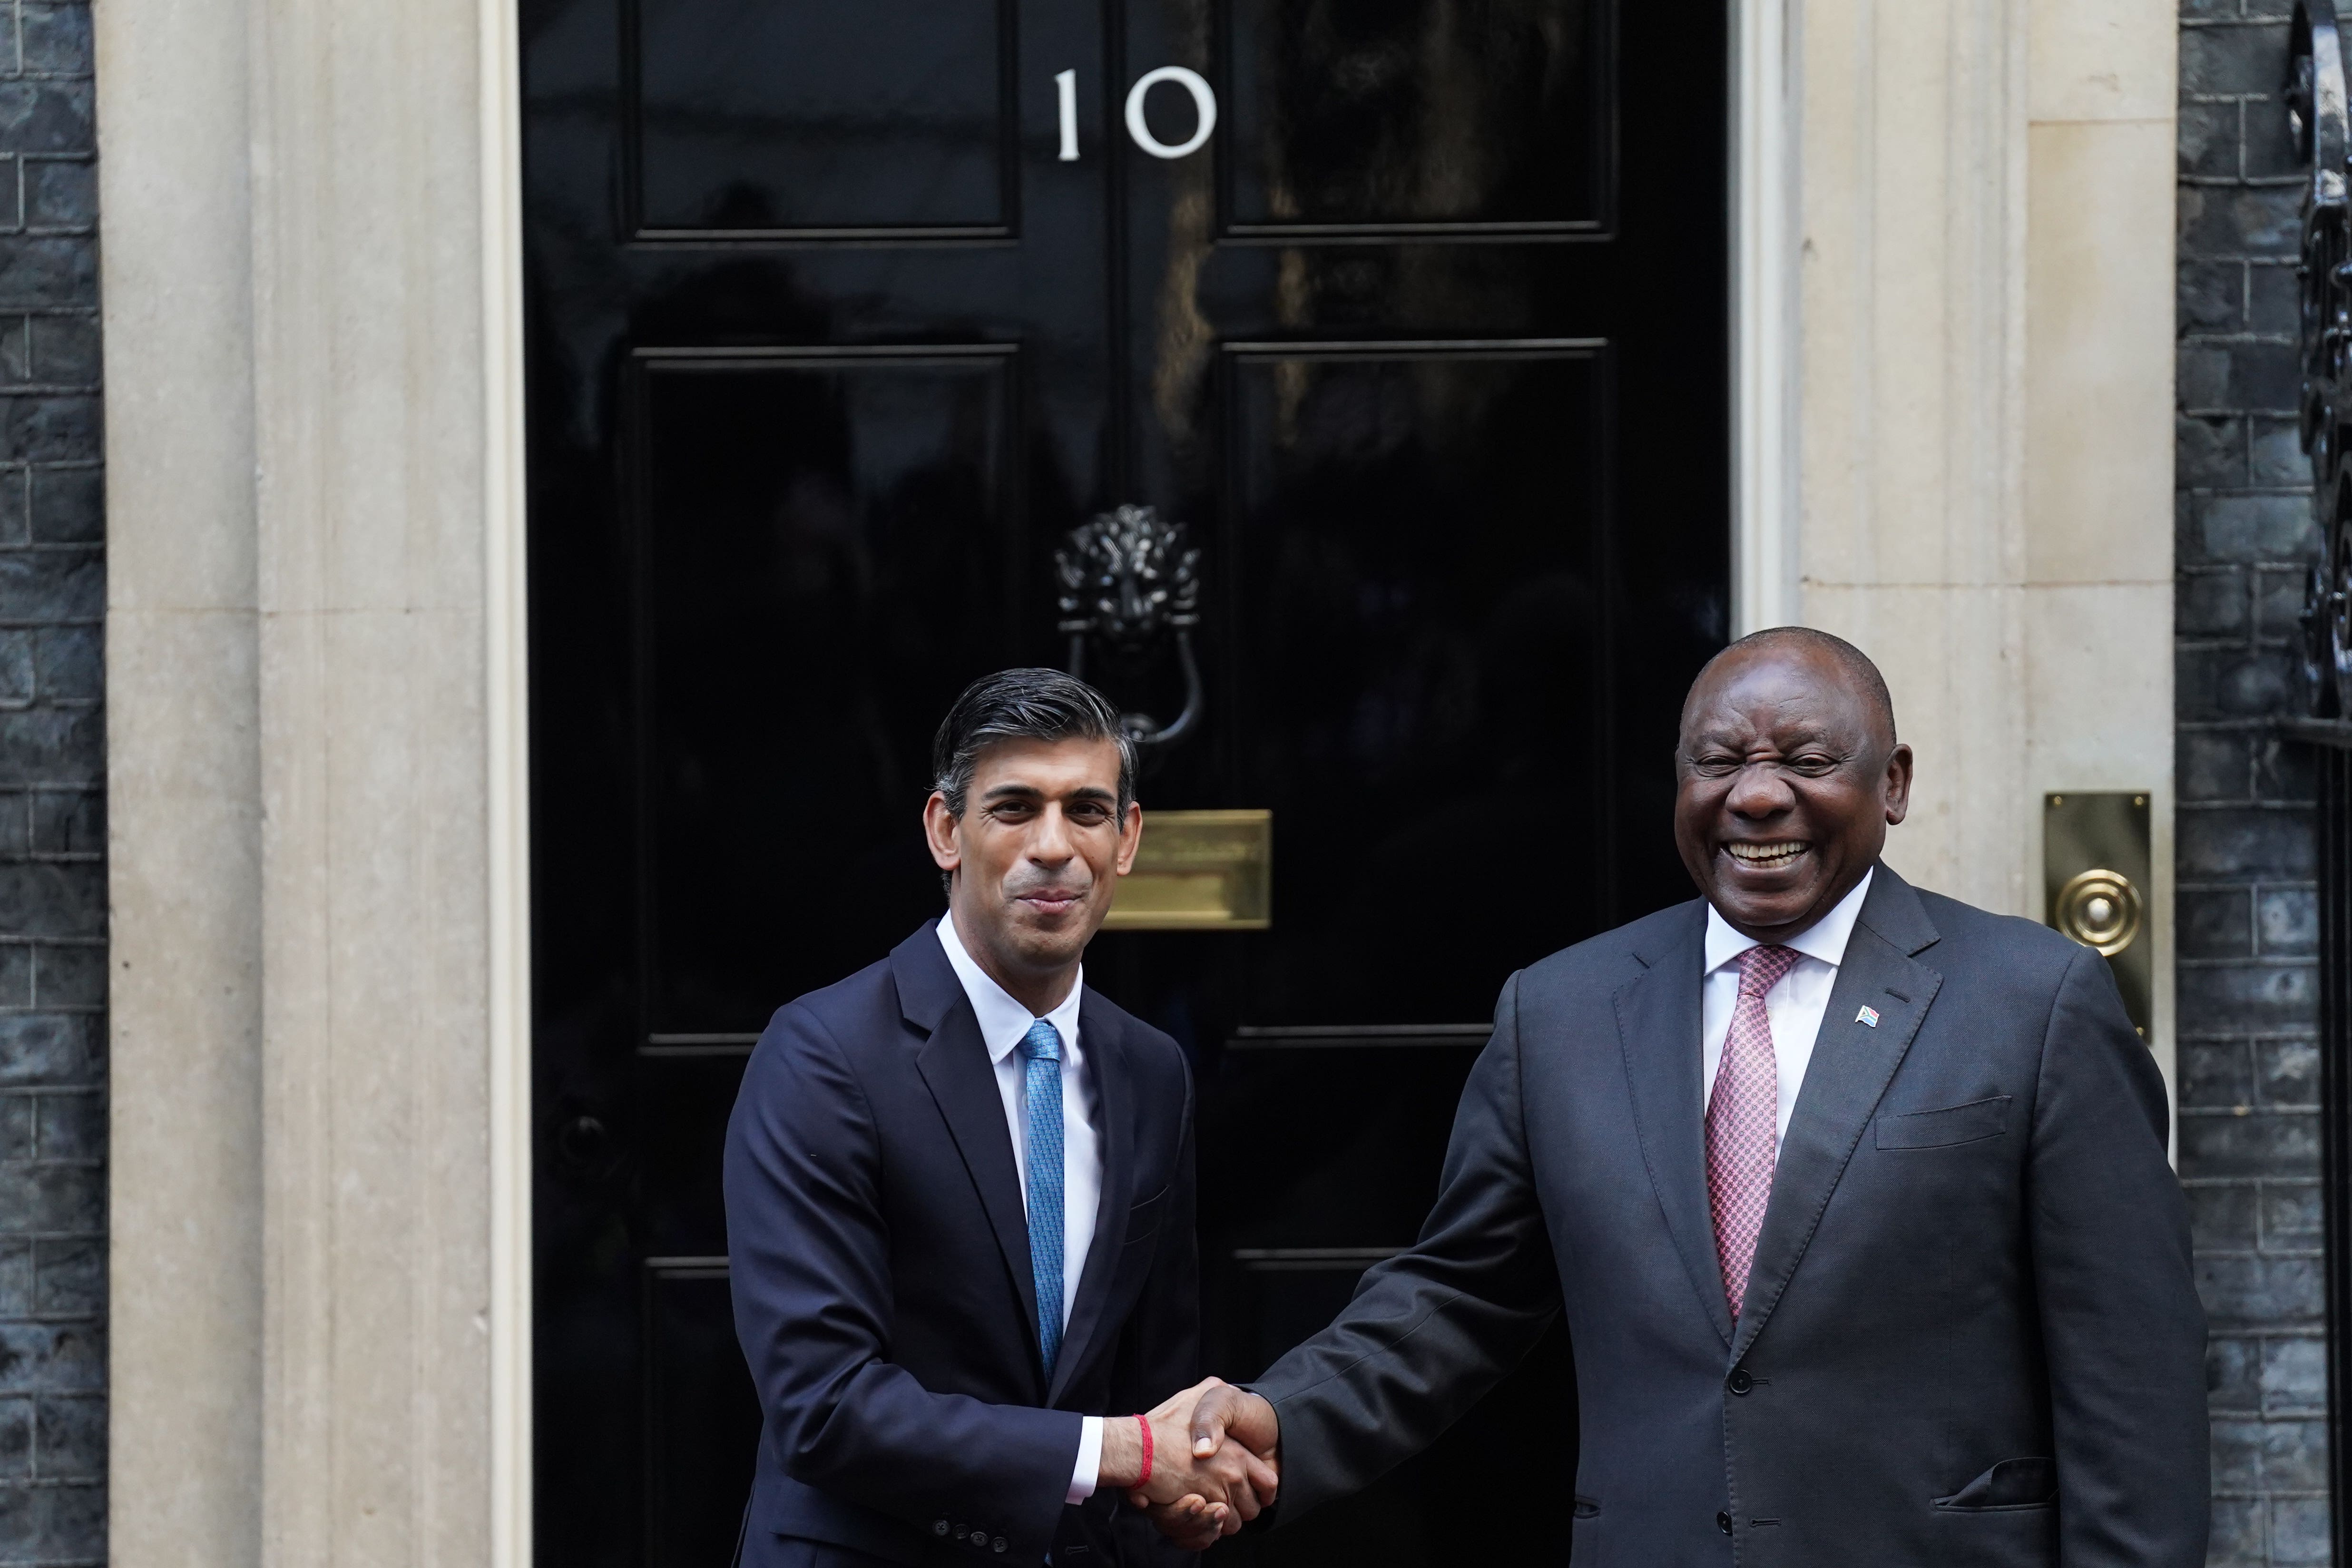 Prime Minister Rishi Sunak welcomes President Cyril Ramaphosa of South Africa outside 10 Downing Street, London, ahead of a bilateral meeting during his state visit to the UK (Stefan Rousseau/PA)